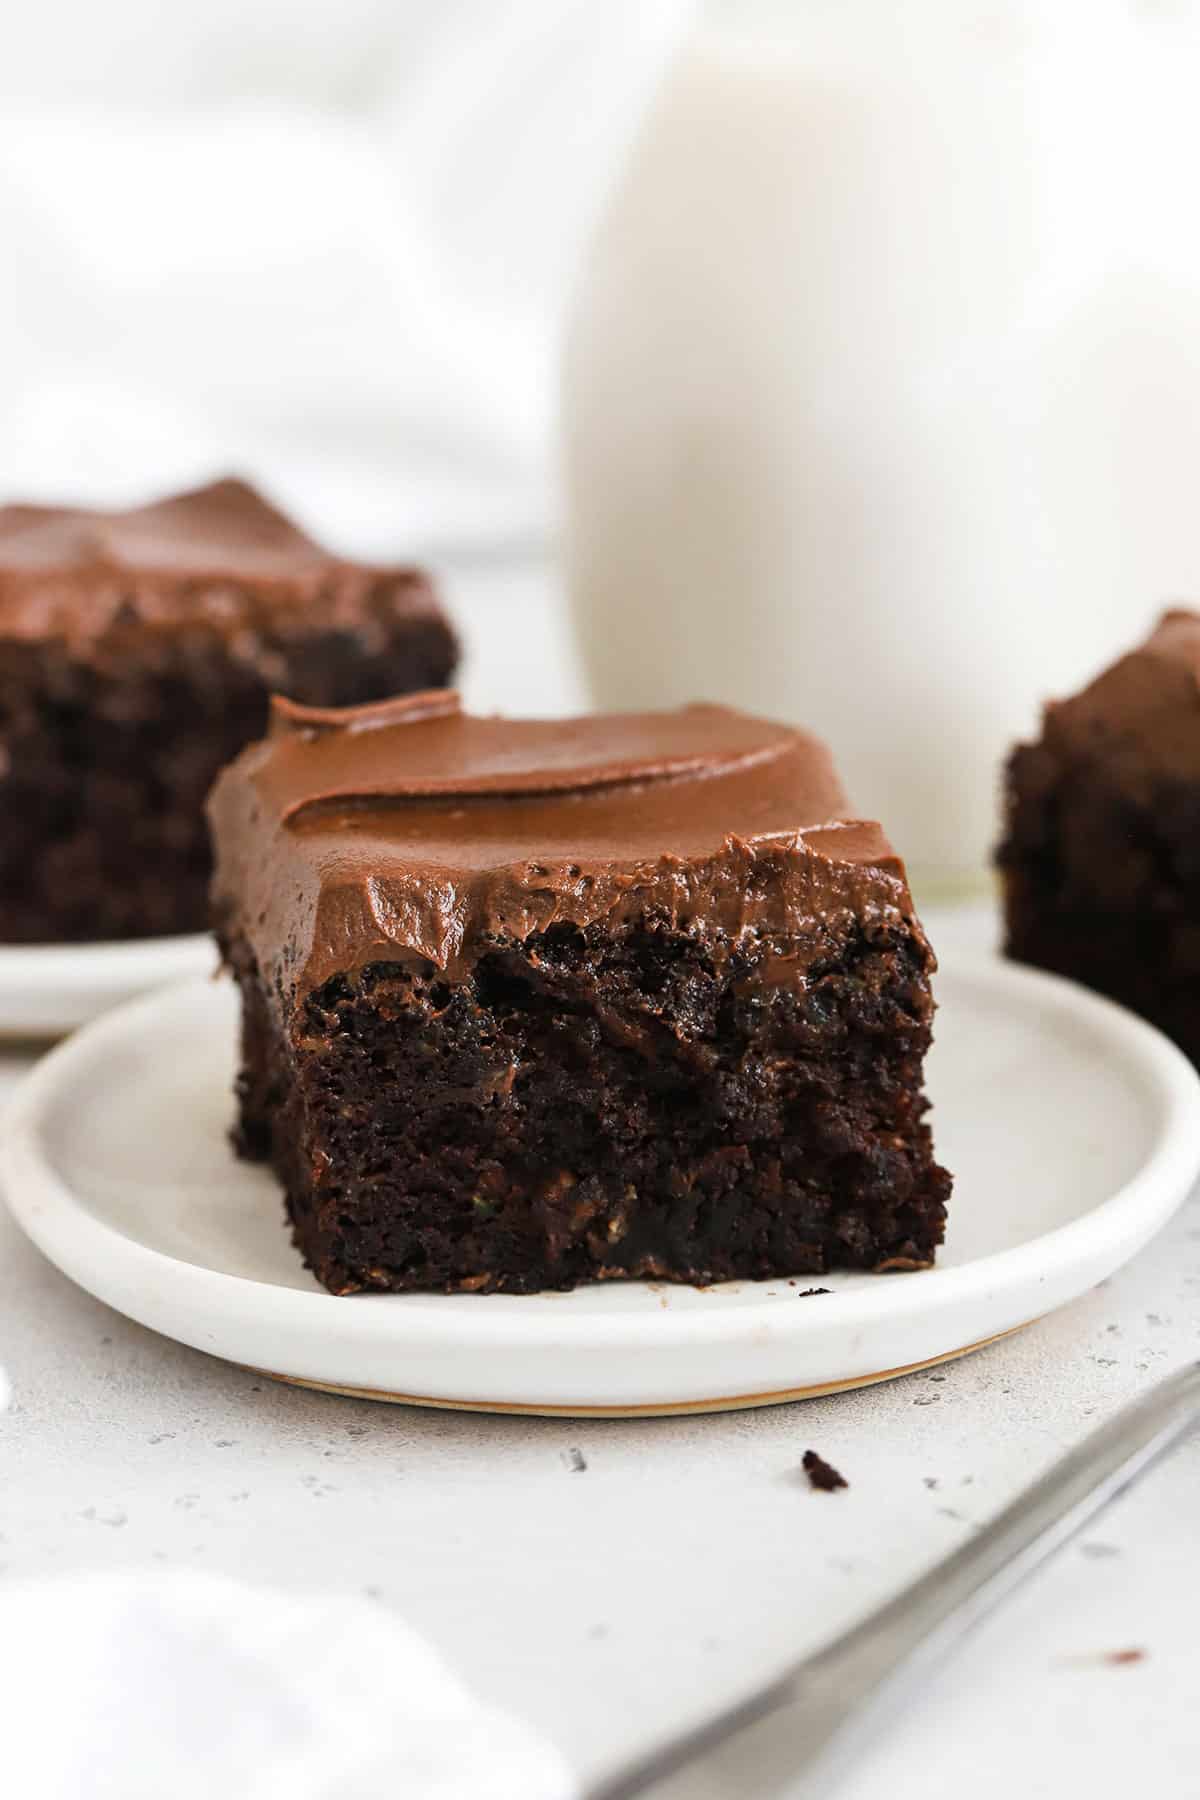 slices of gluten-free chocolate zucchini cake with chocolate frosting on white plates